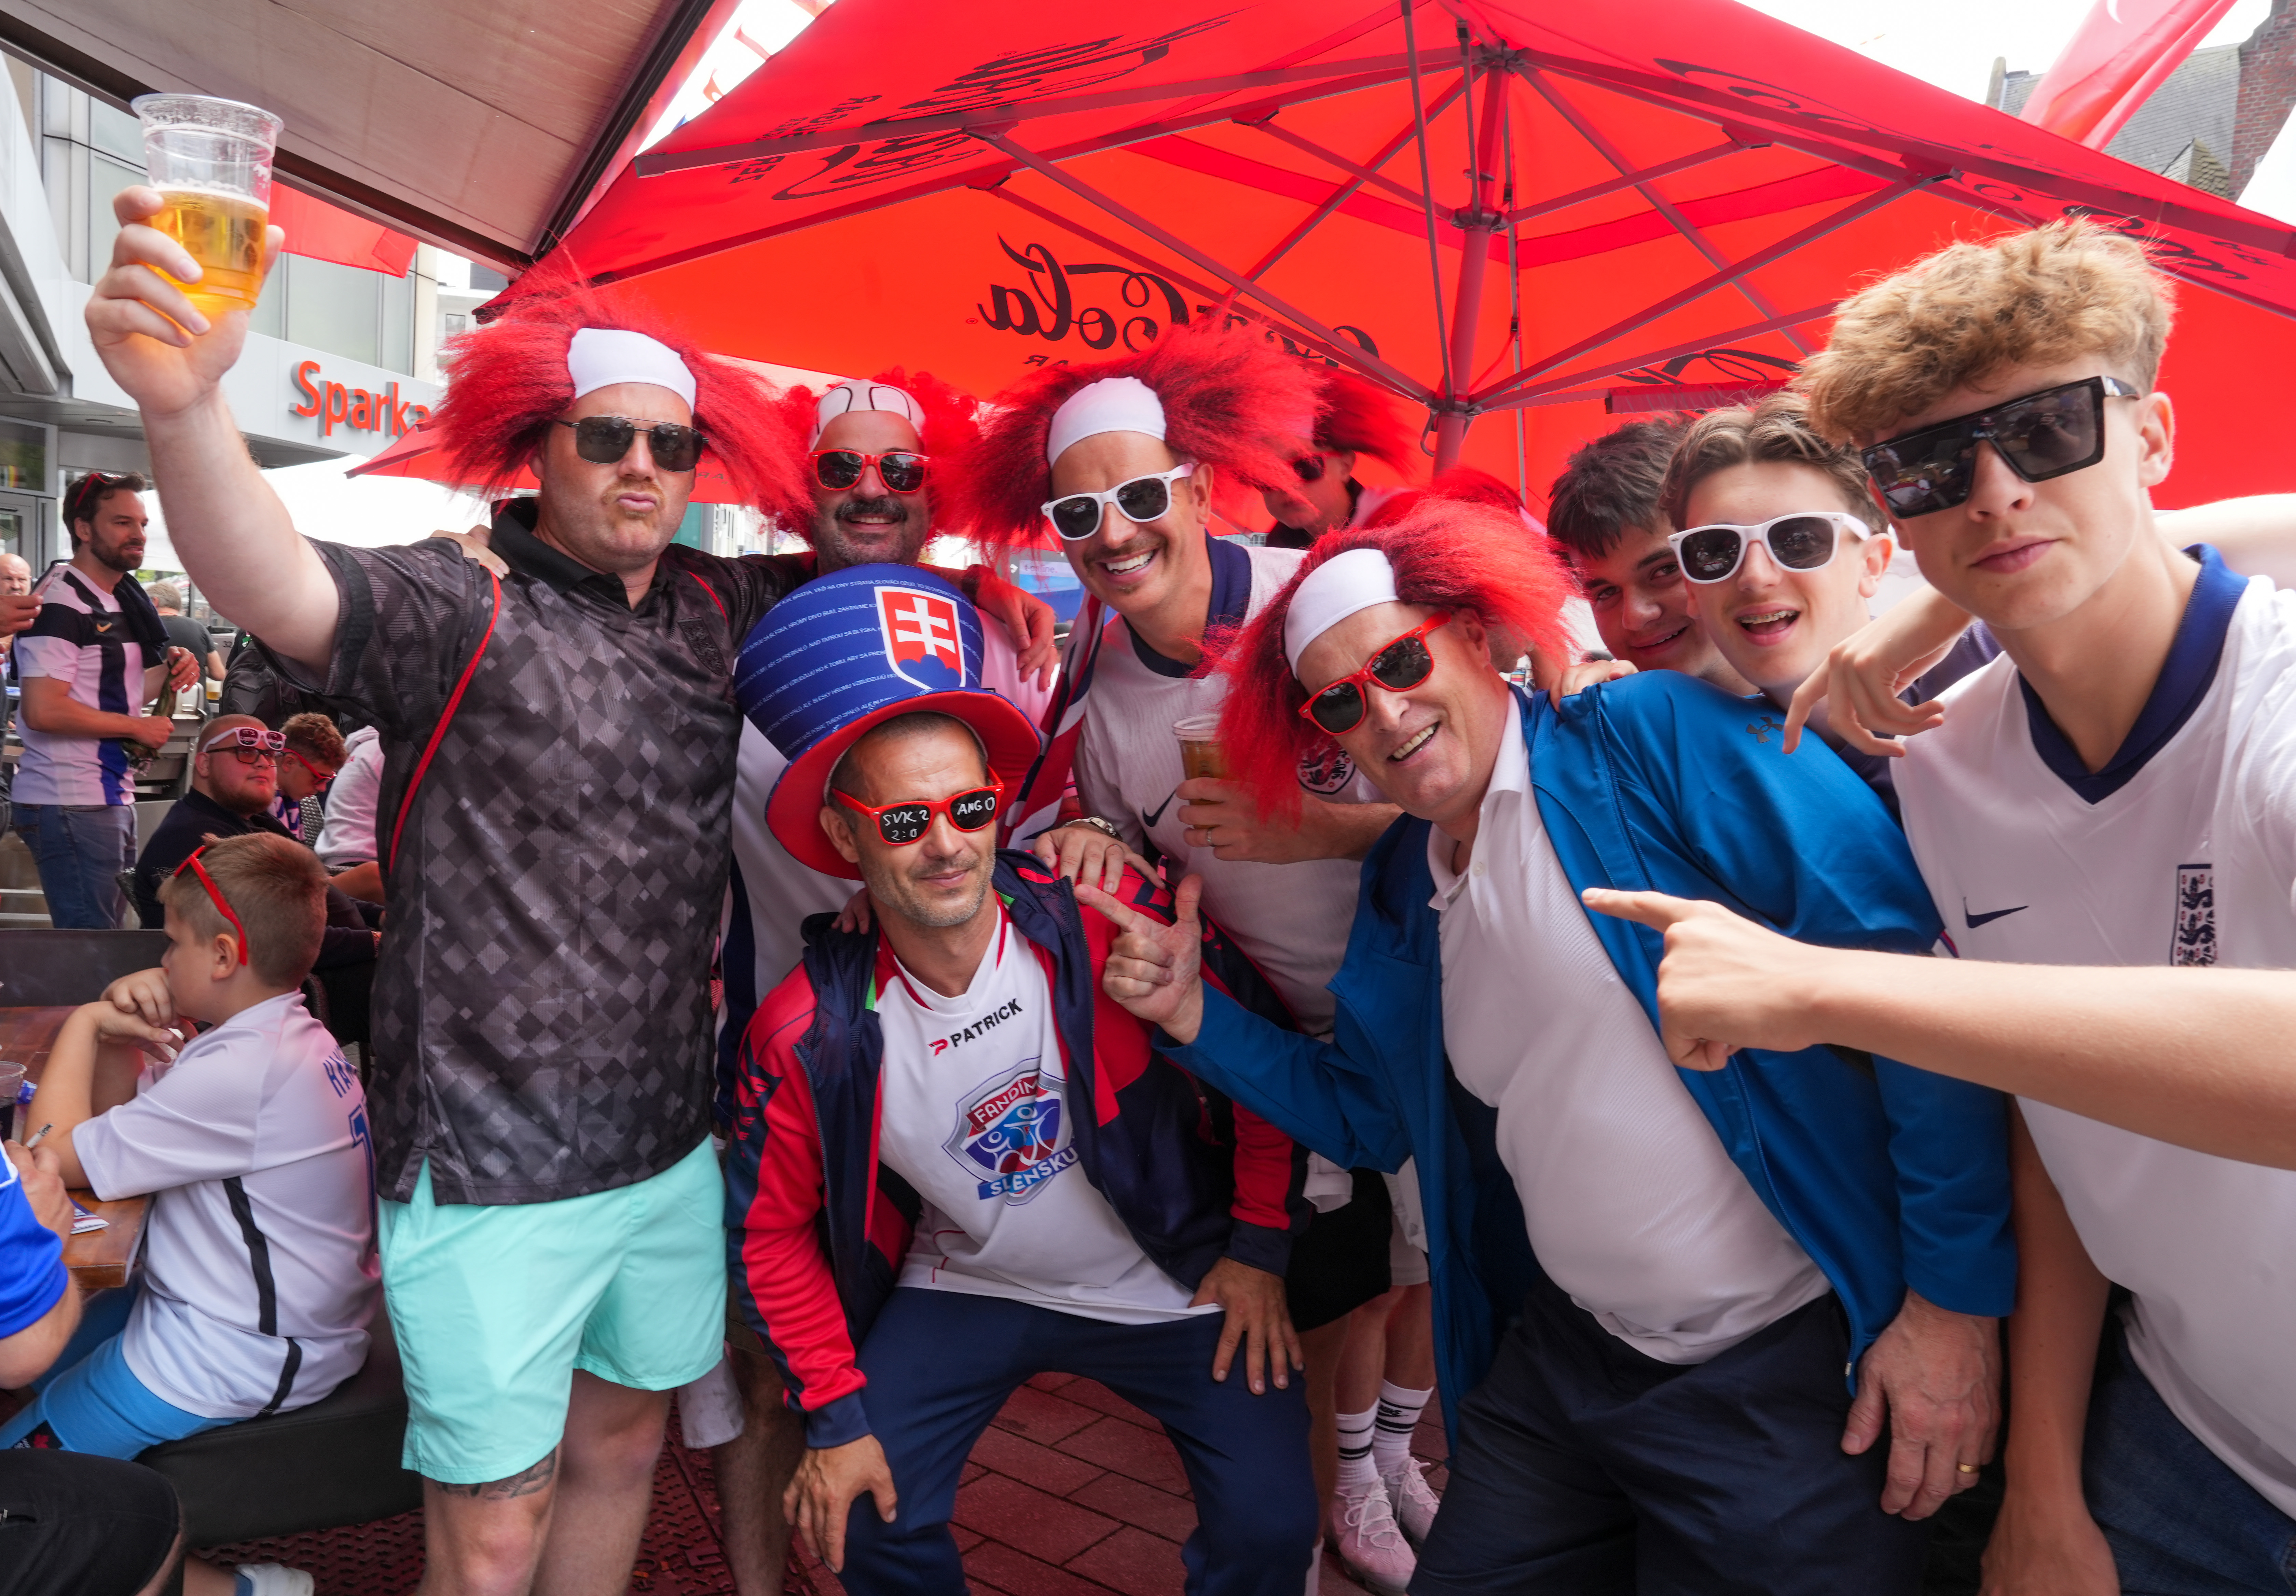 England fans shared a laugh with Slovakia supporters